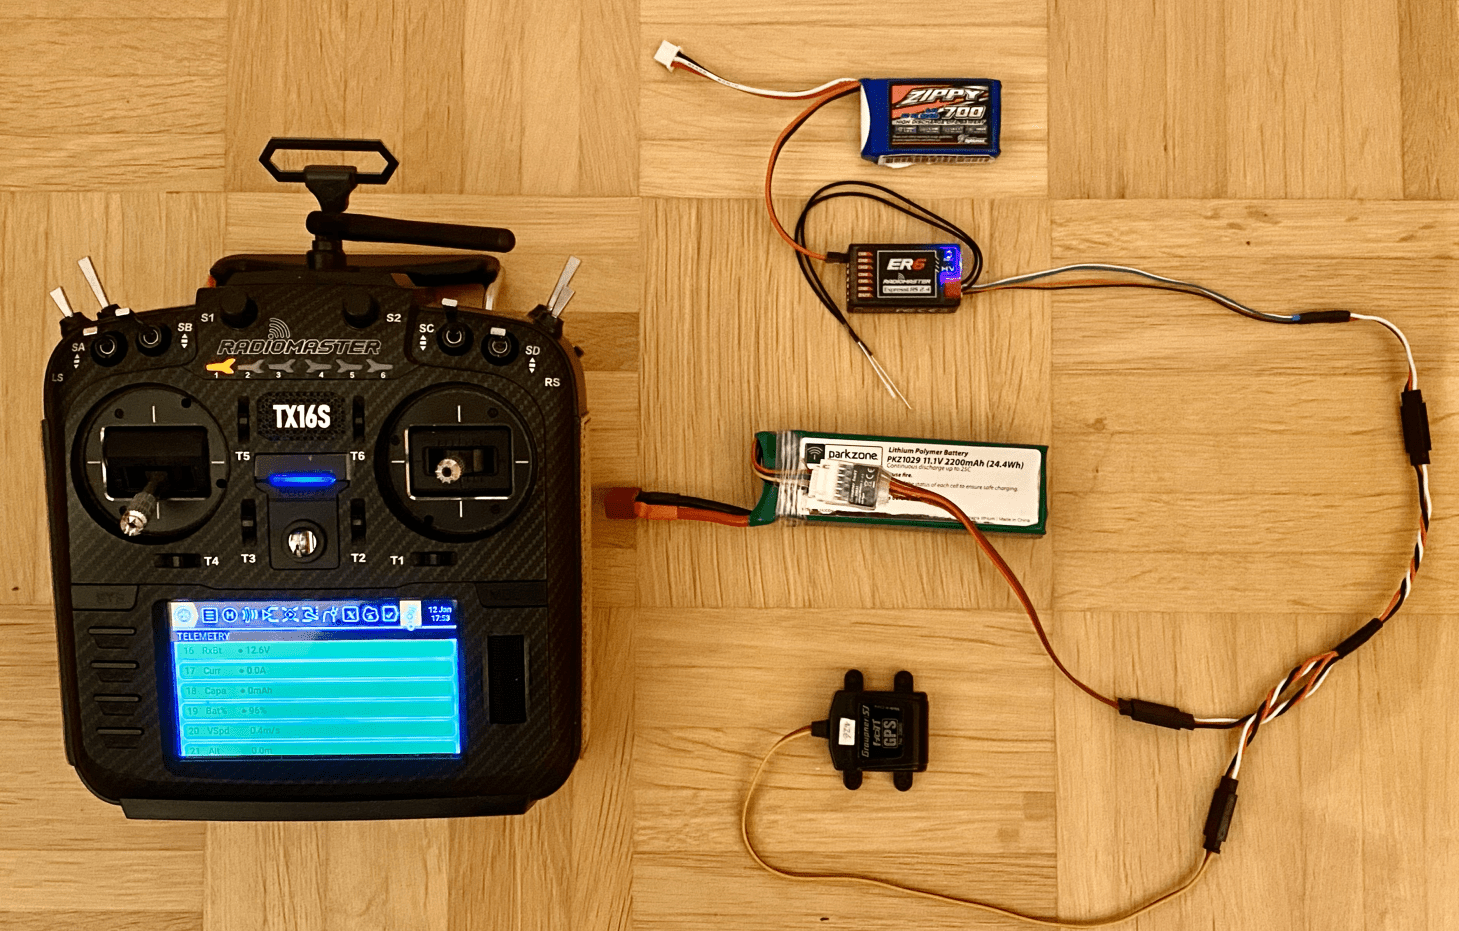 HoTT Telemetry example setup - GPS/Vario and Voltage Module connected to ER6